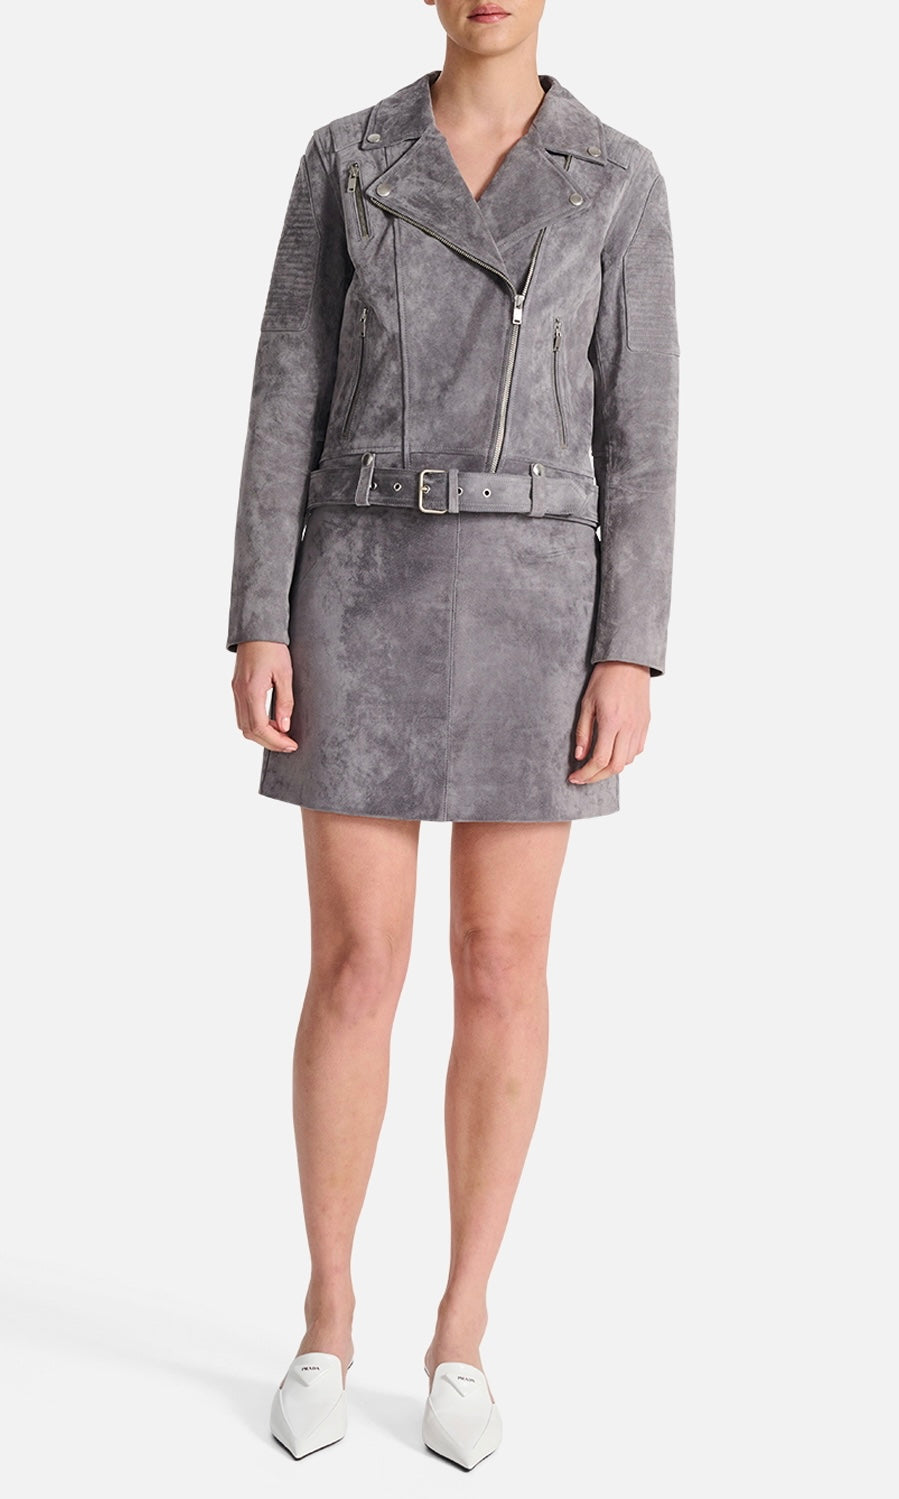 Ena Pelly Classic Suede Biker Jacket In Charcoal